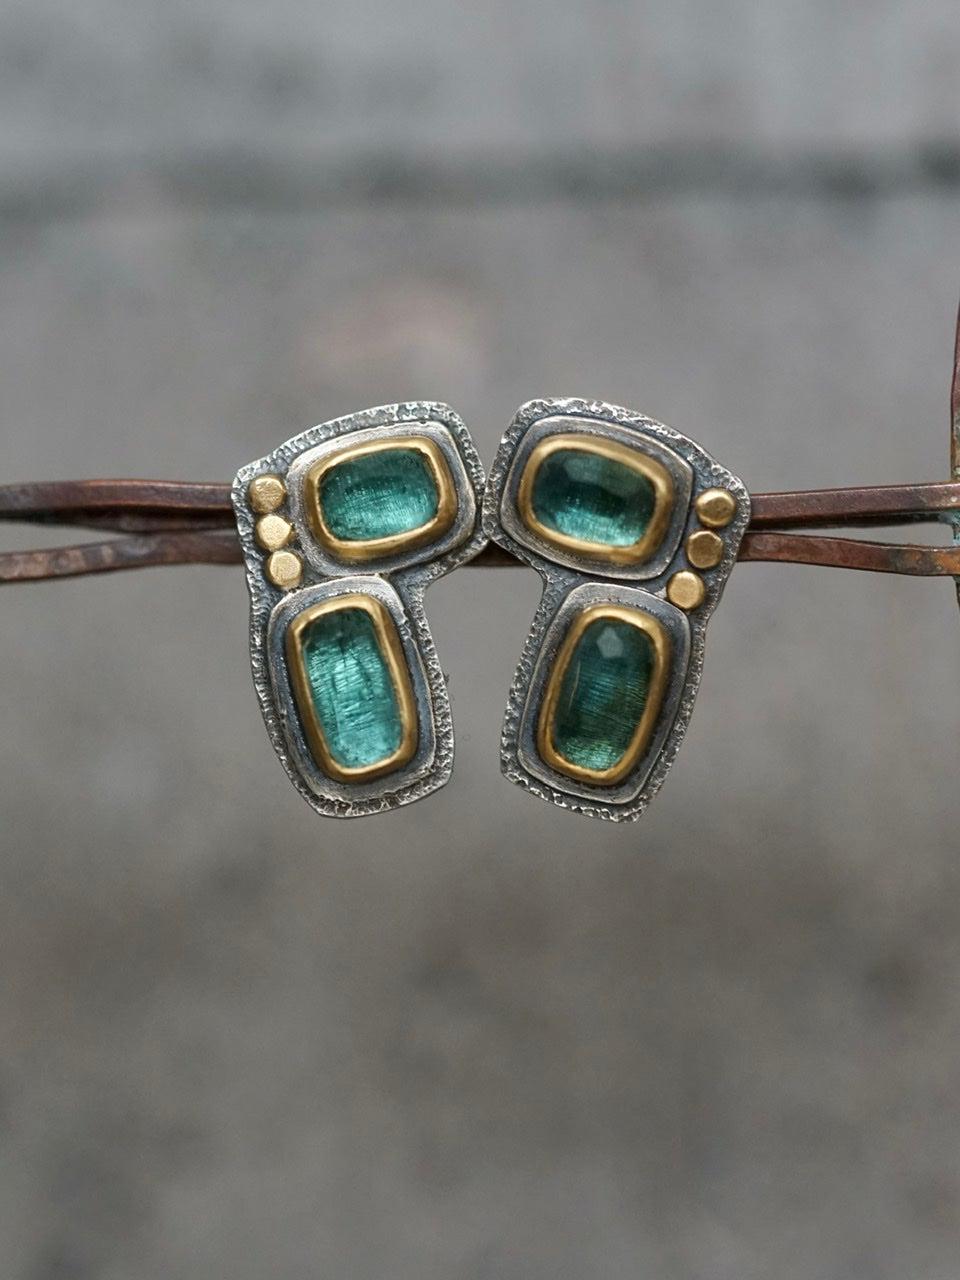 Teal blue tourmaline and 22k gold post earrings